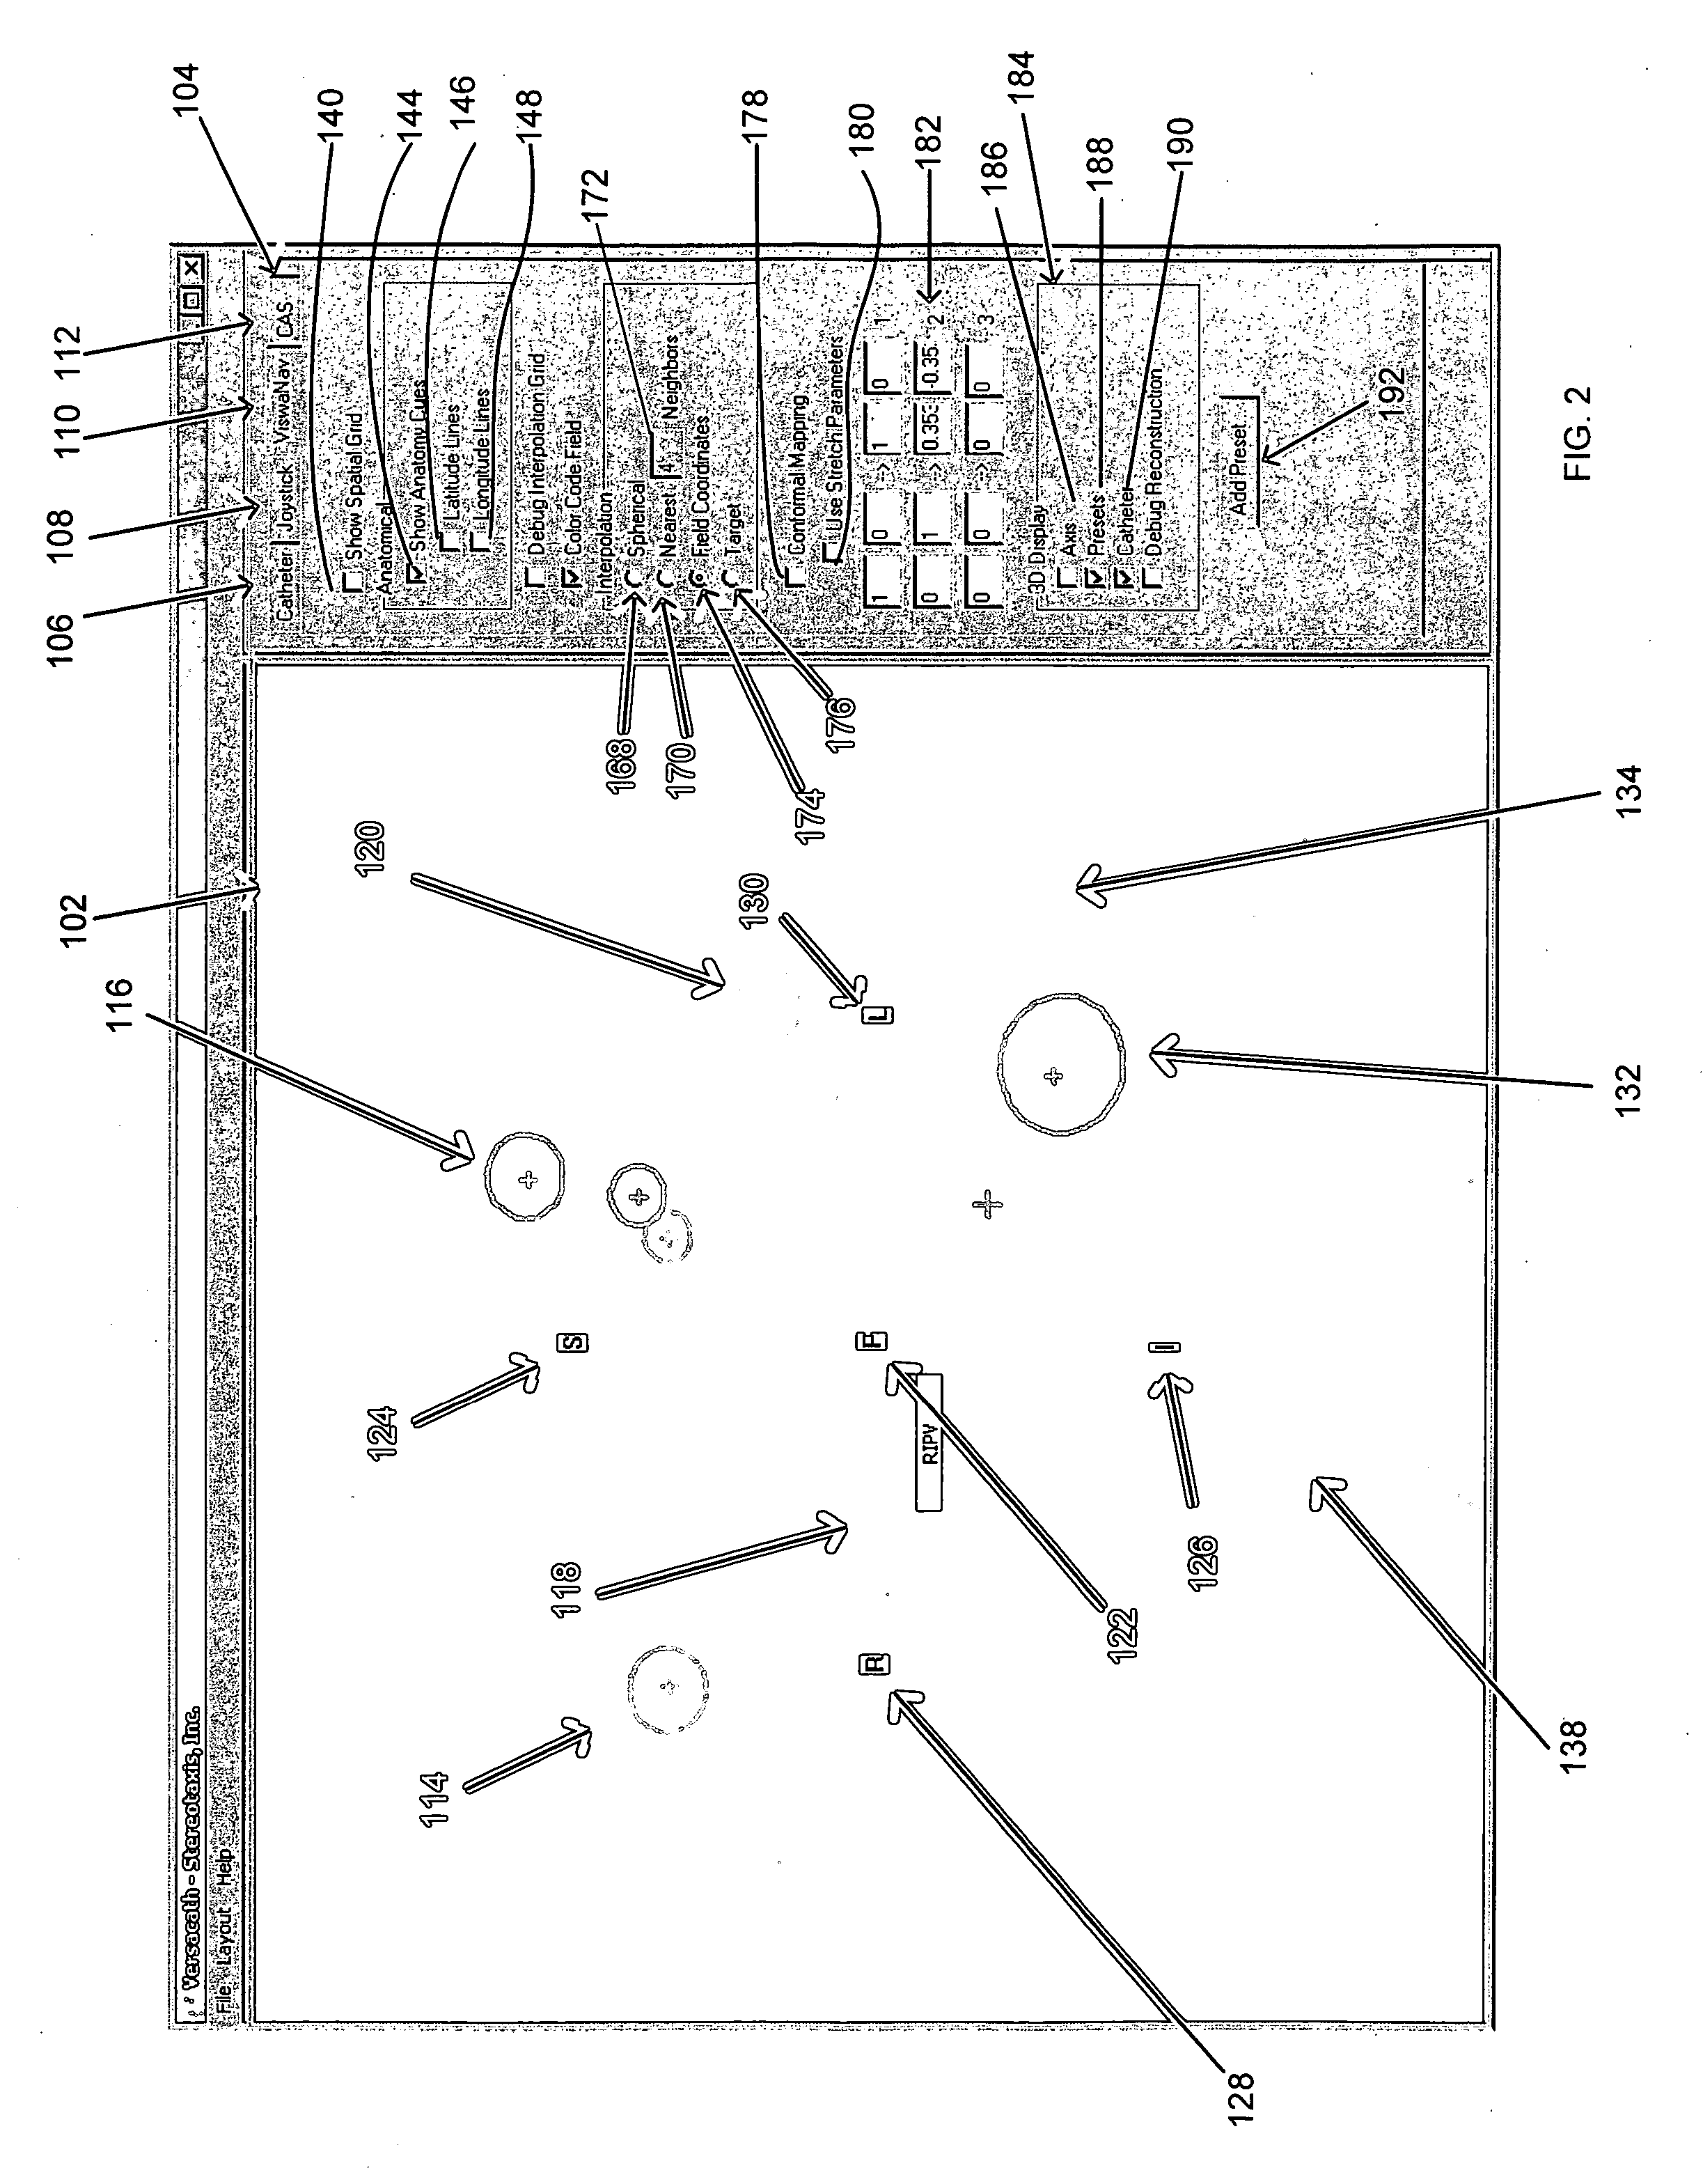 Method of, and apparatus for, controlling medical navigation systems